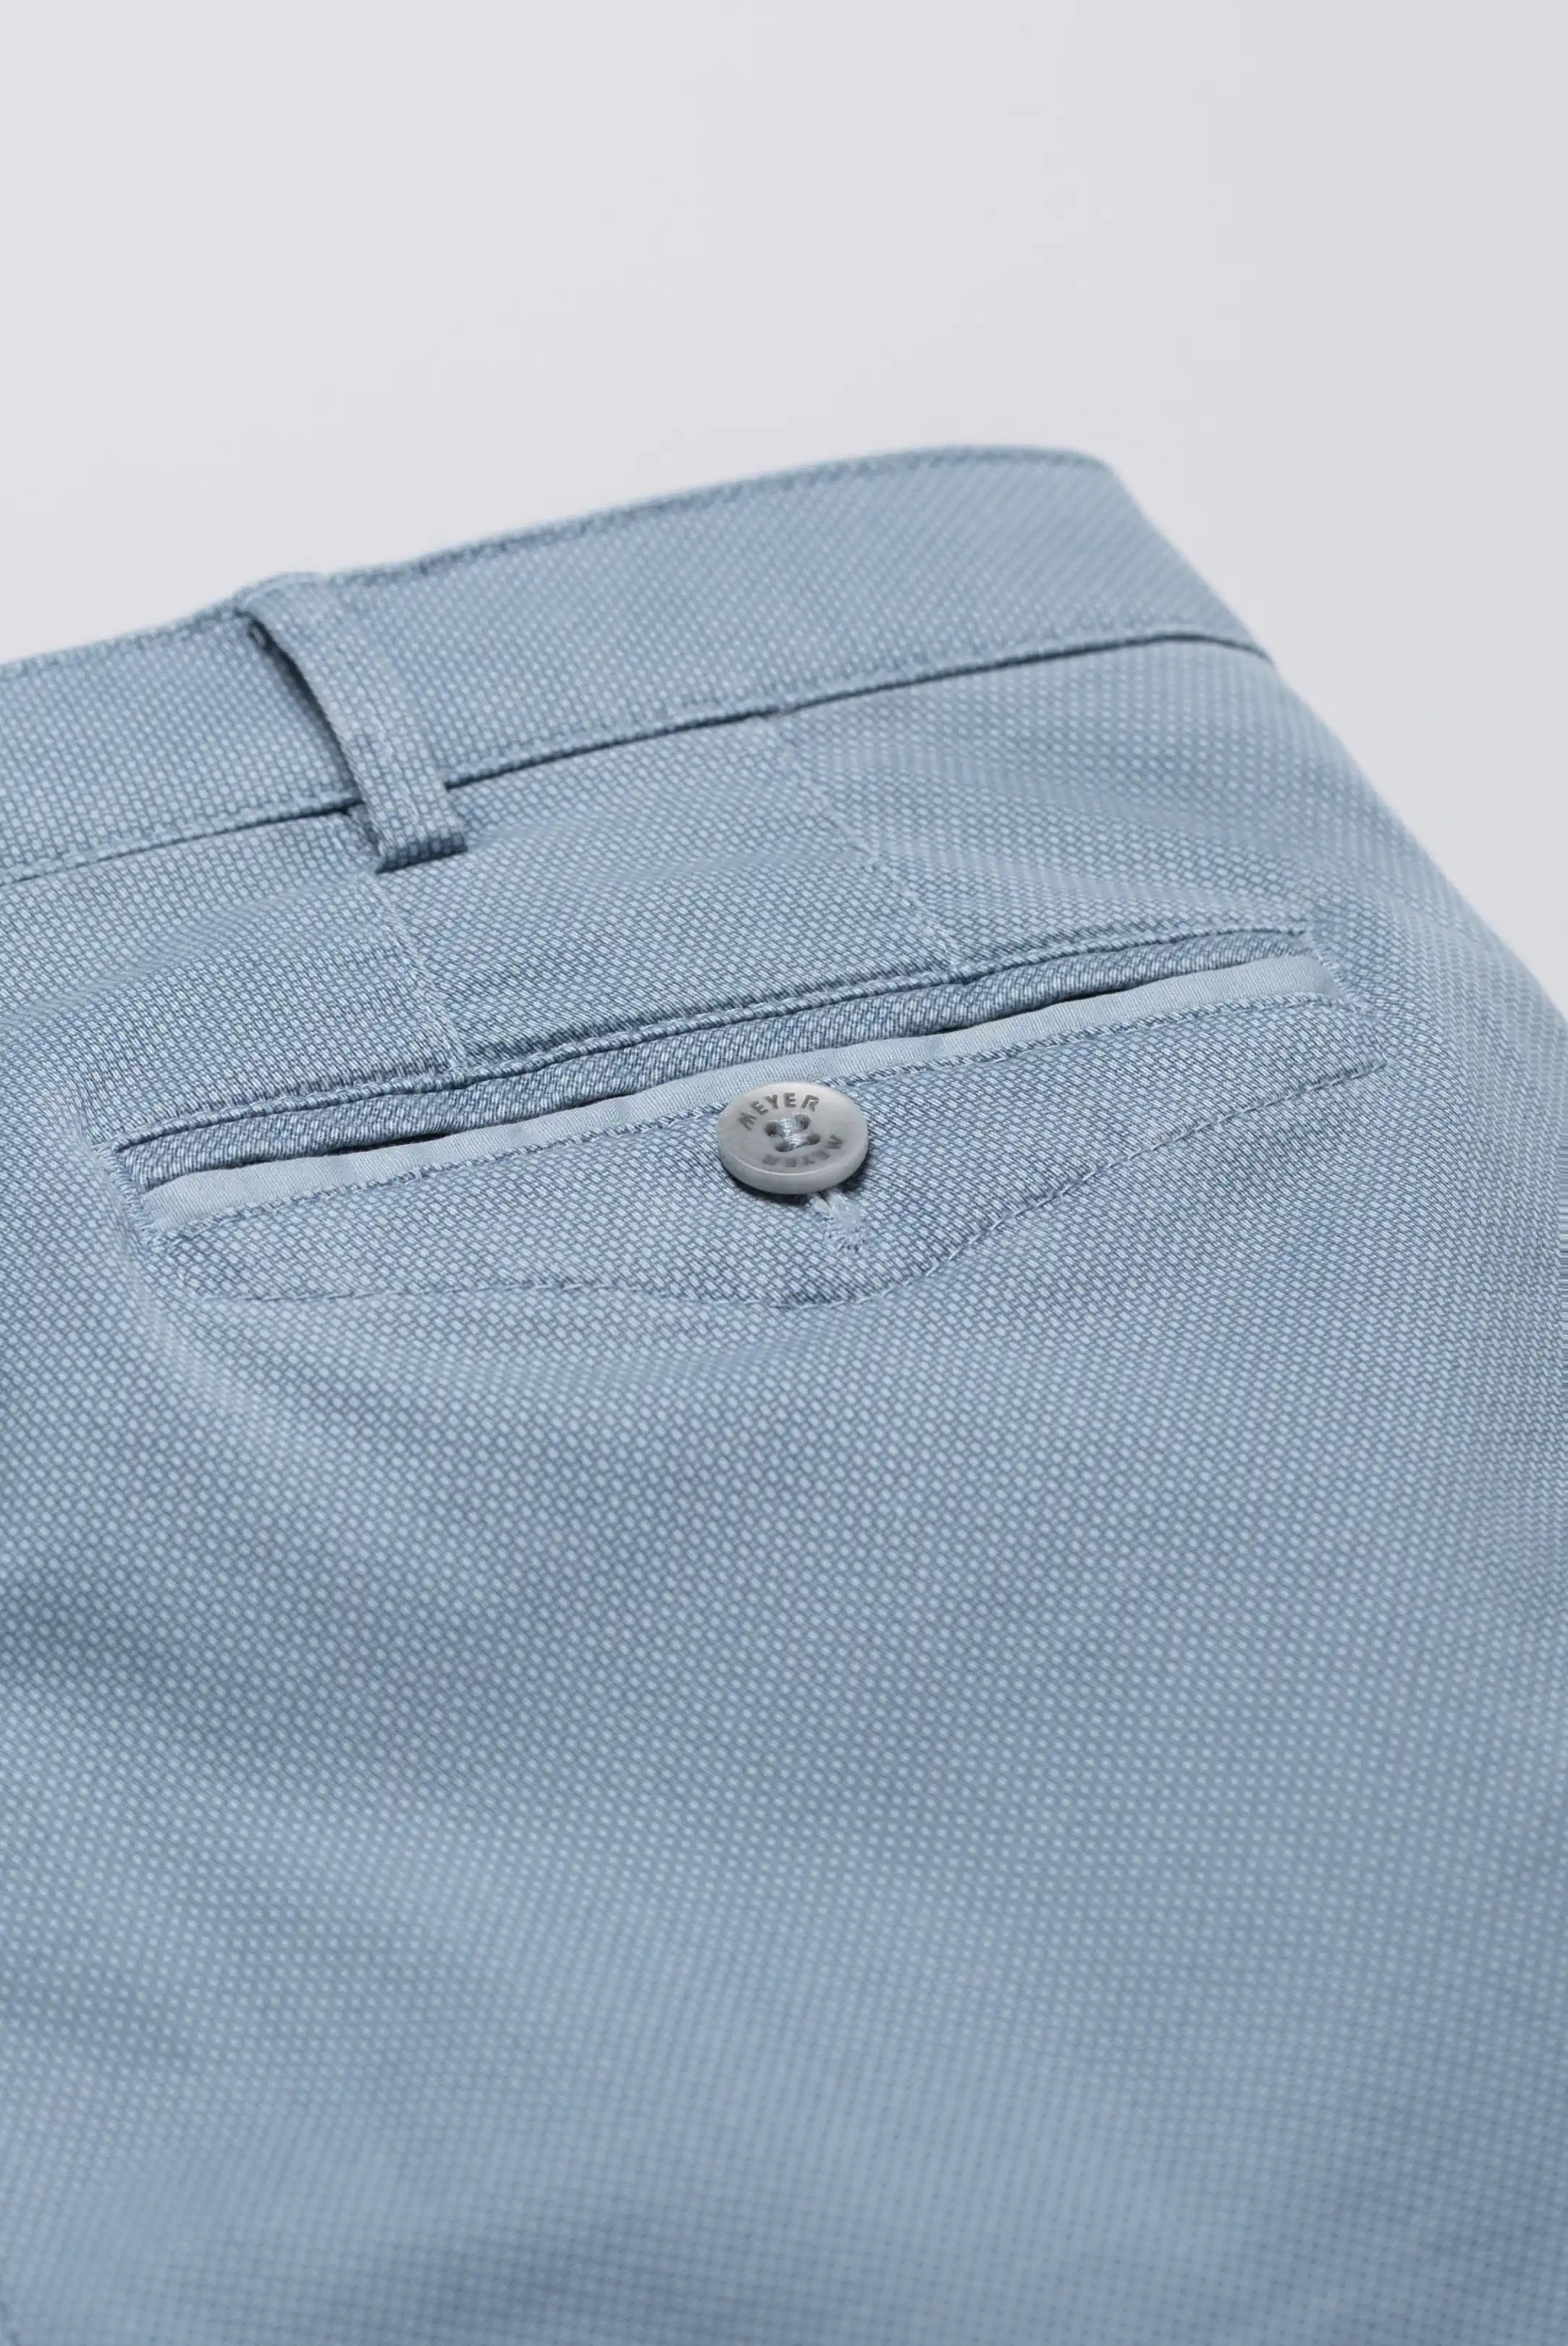 MEYER Chicago Trousers - 5056 Micro Print Cotton Chino - Blue